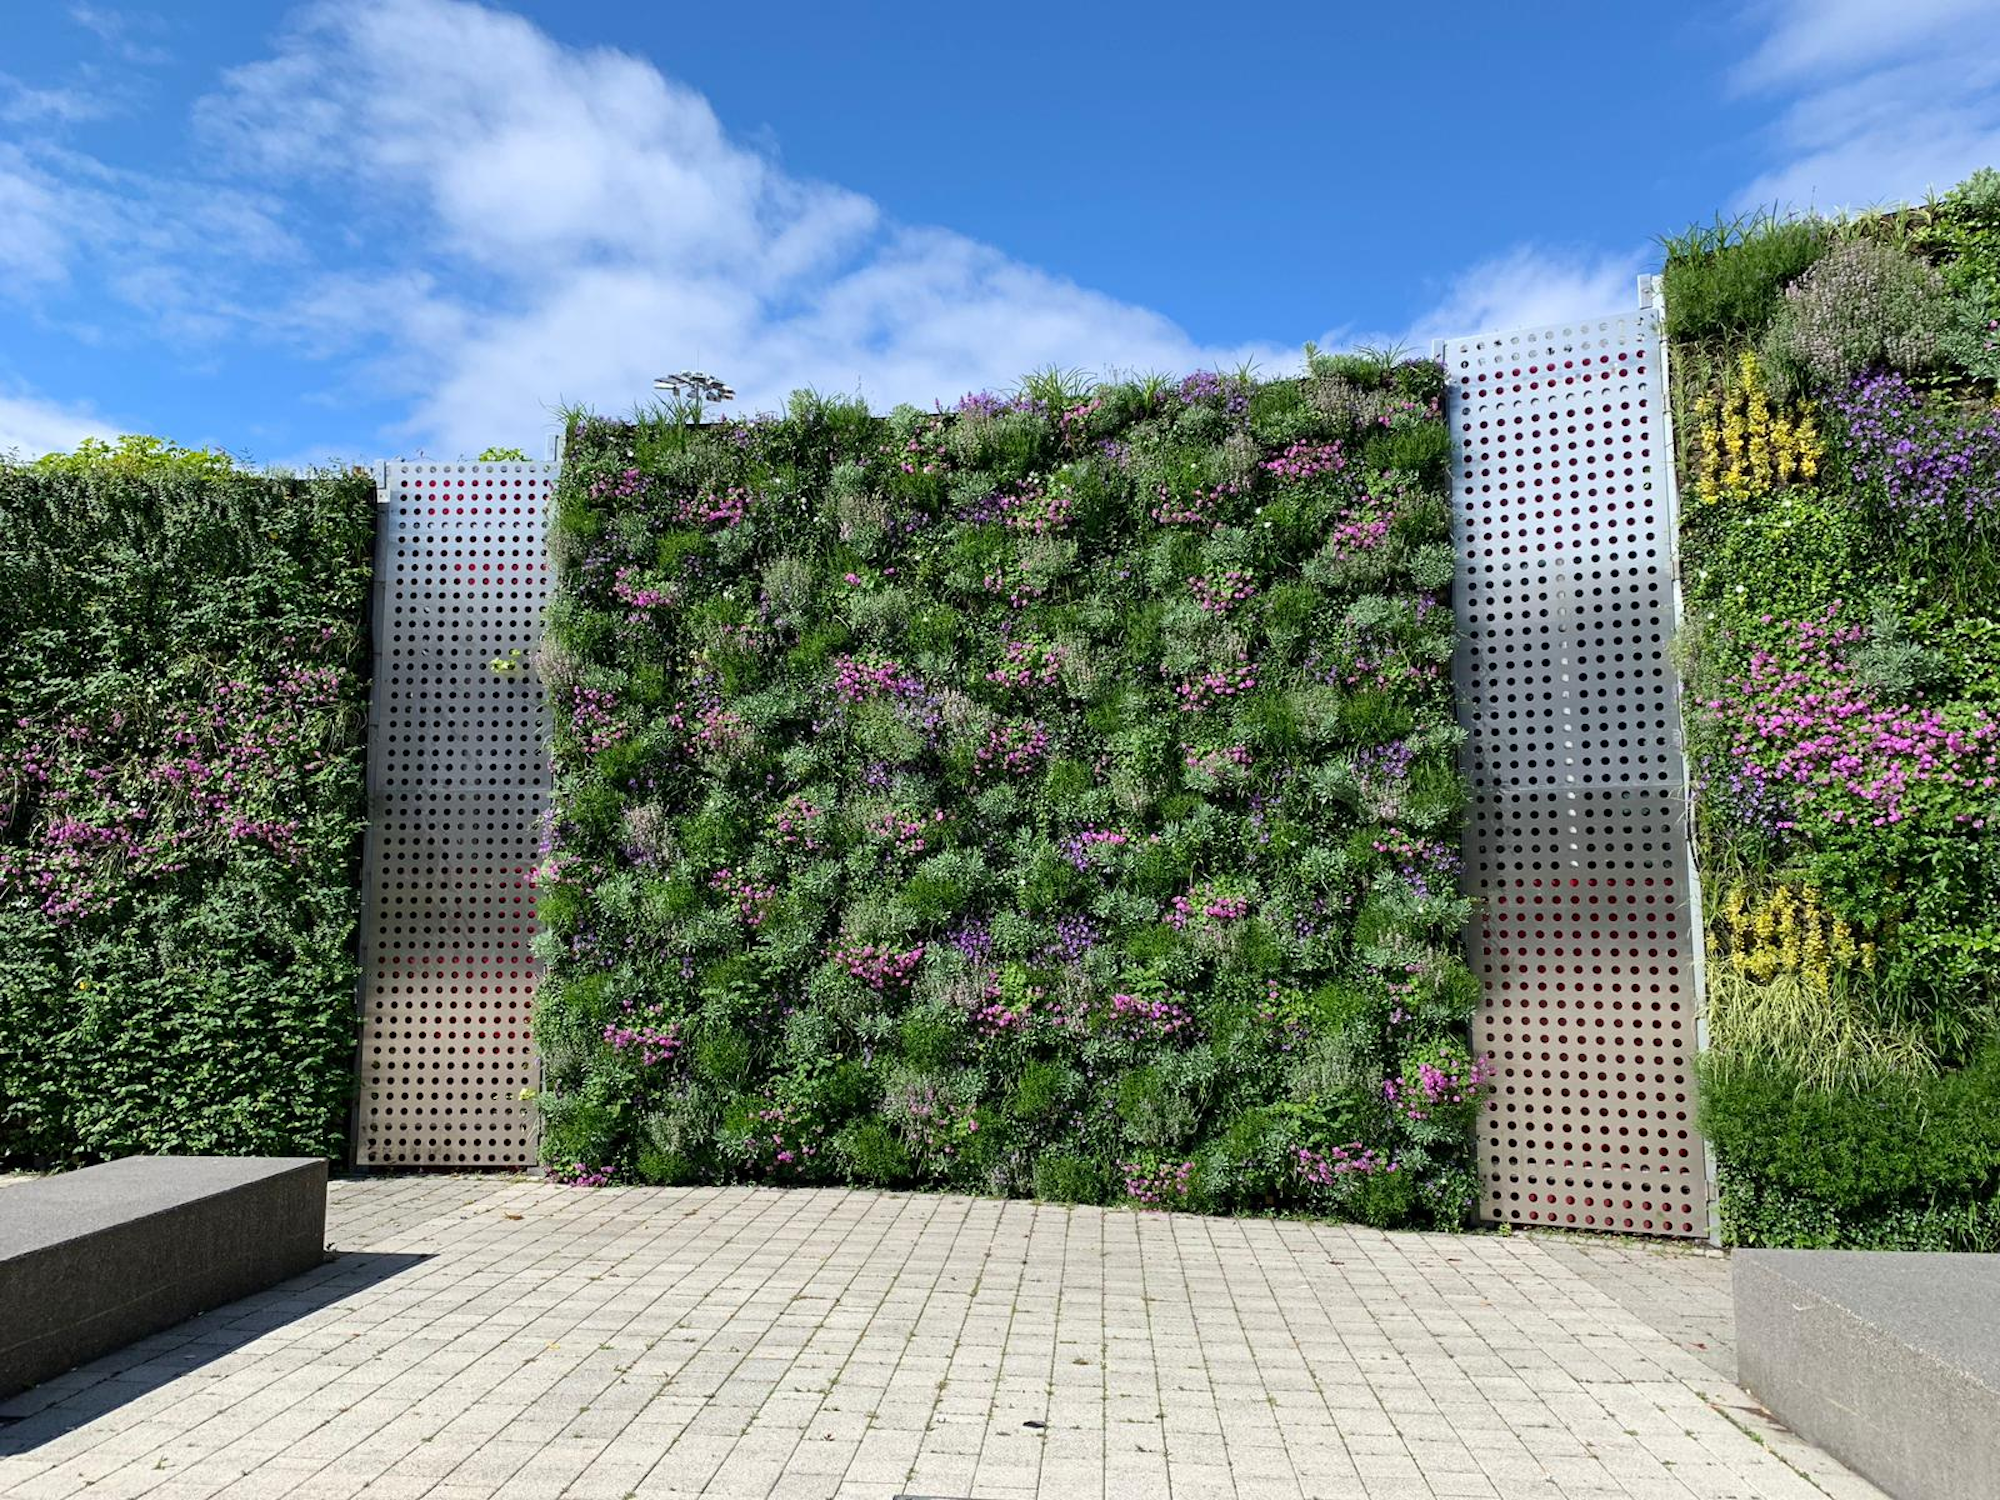 Flowering Living Walls at The NEC